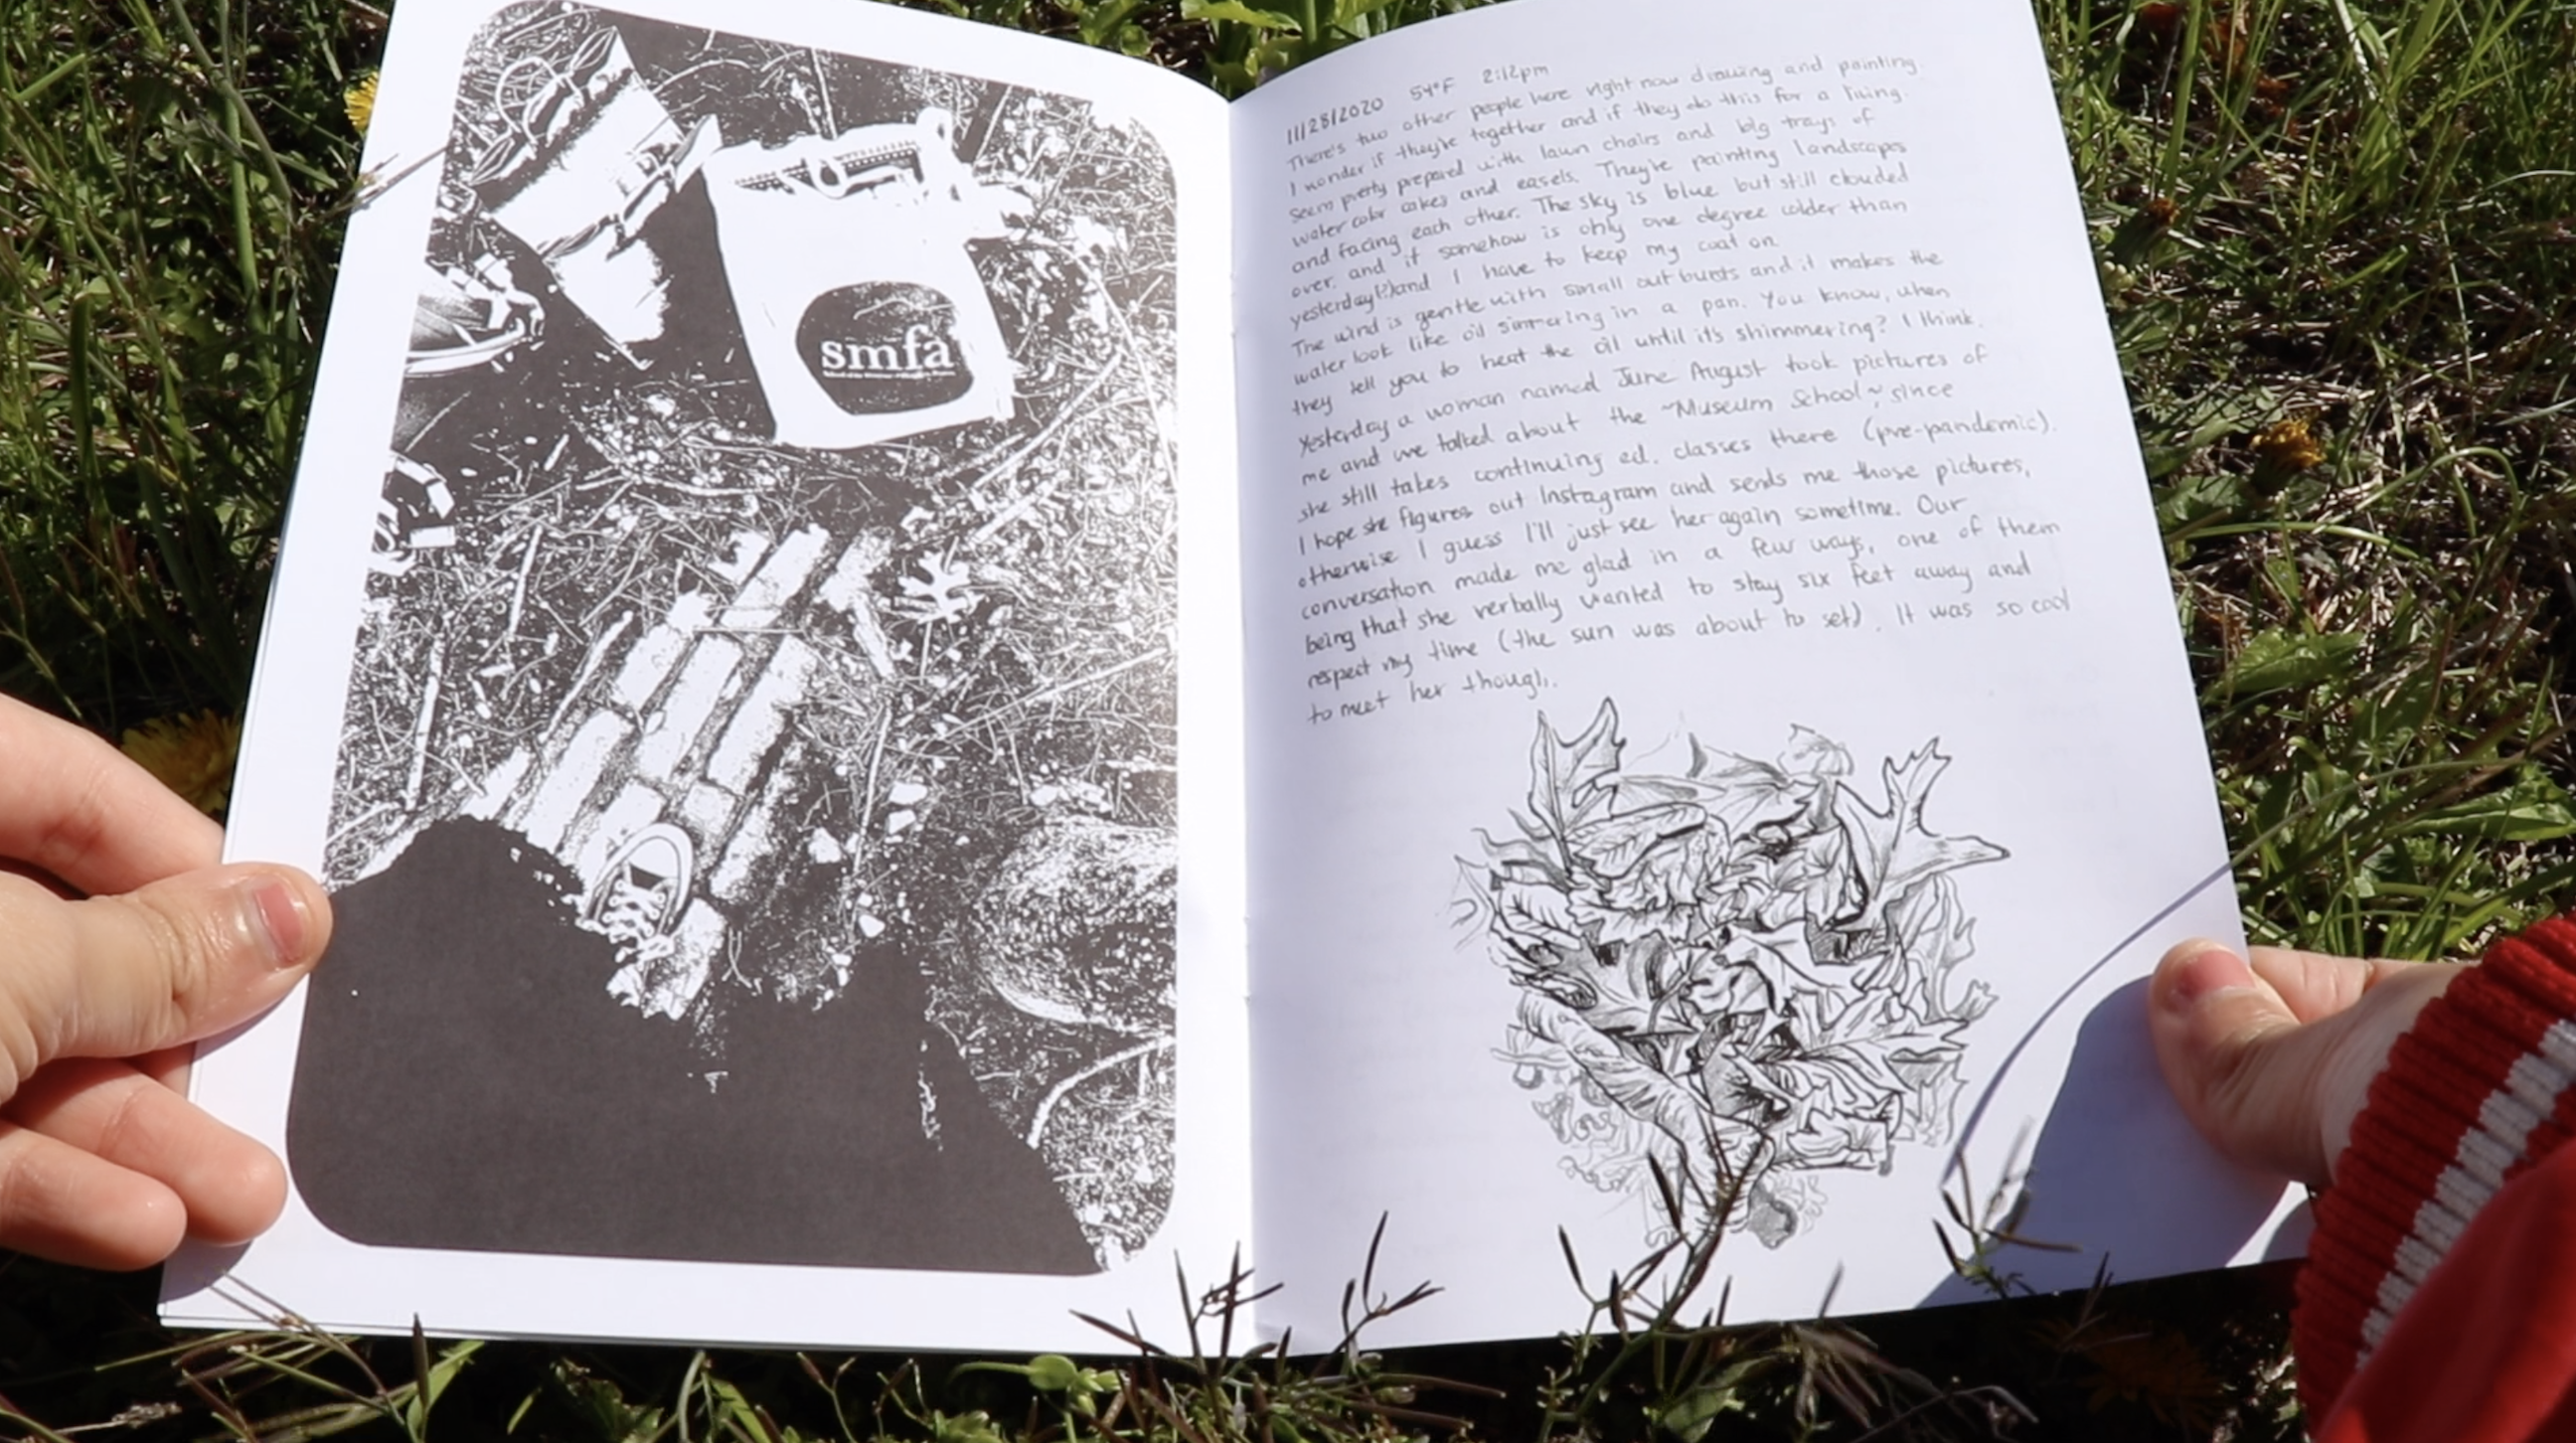 Two hands hold 'Articulations' open to a spread with a high-contrast photo, a hand-written journal entry, and an ink drawing of a leaf pile